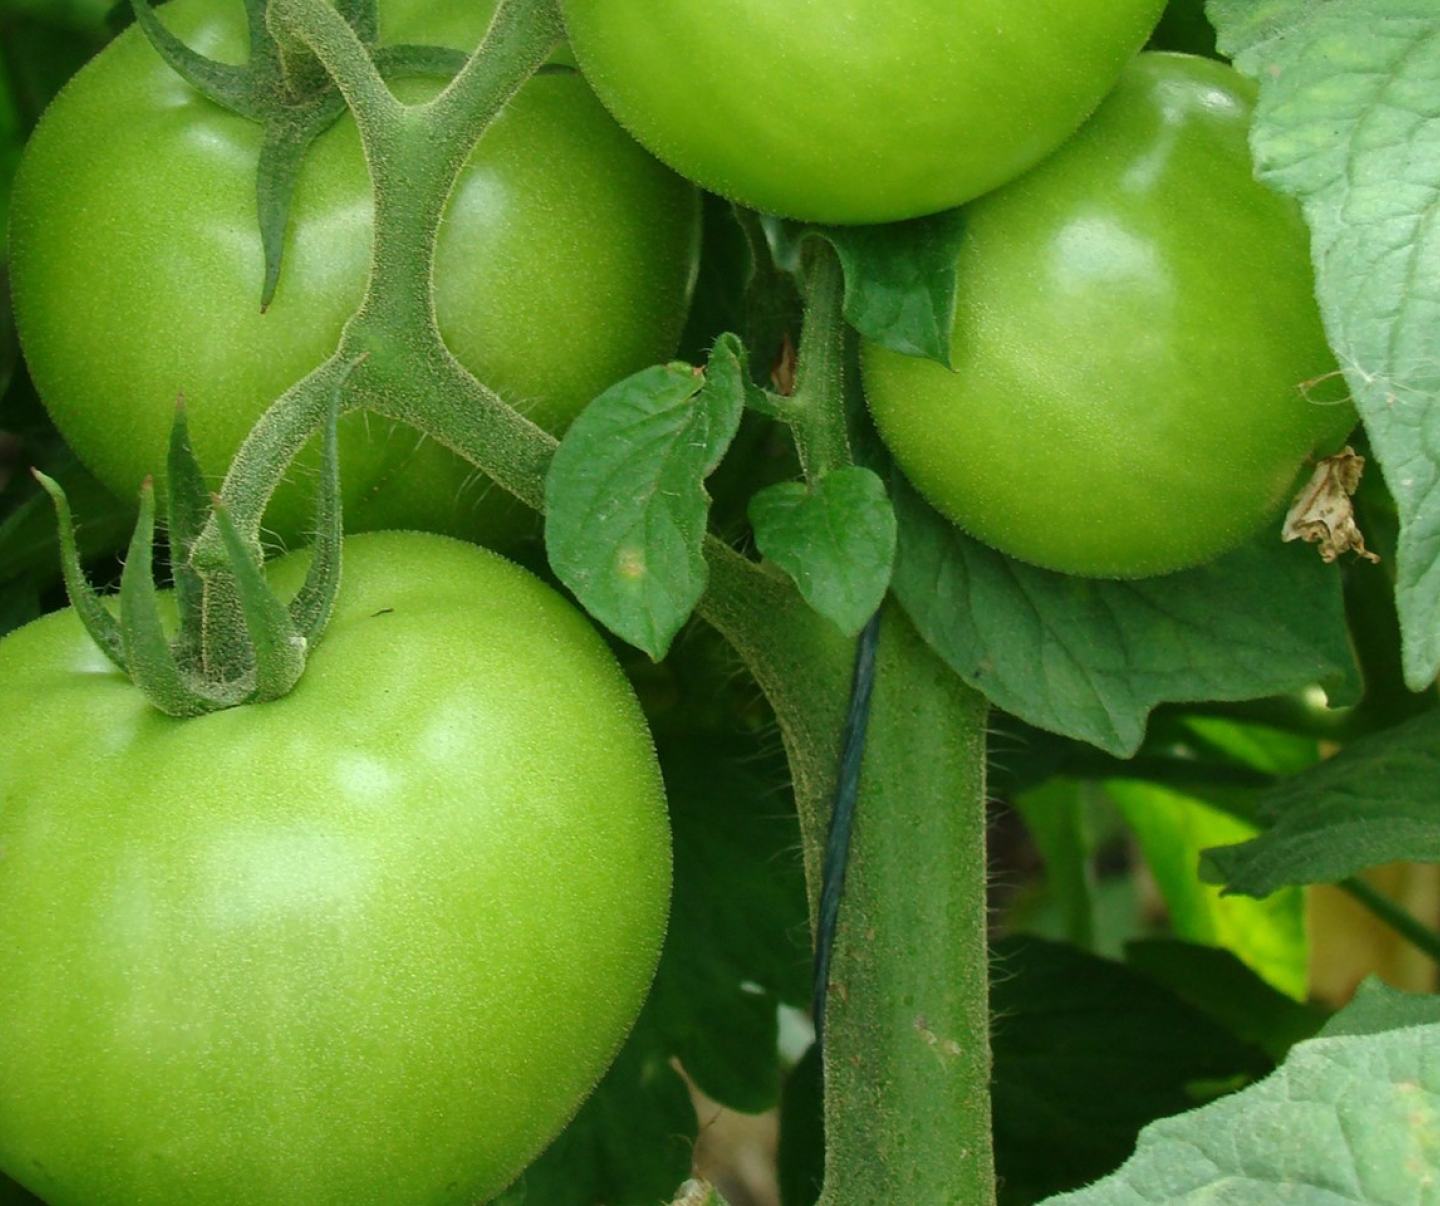 Green Tomatoes on a tree branch